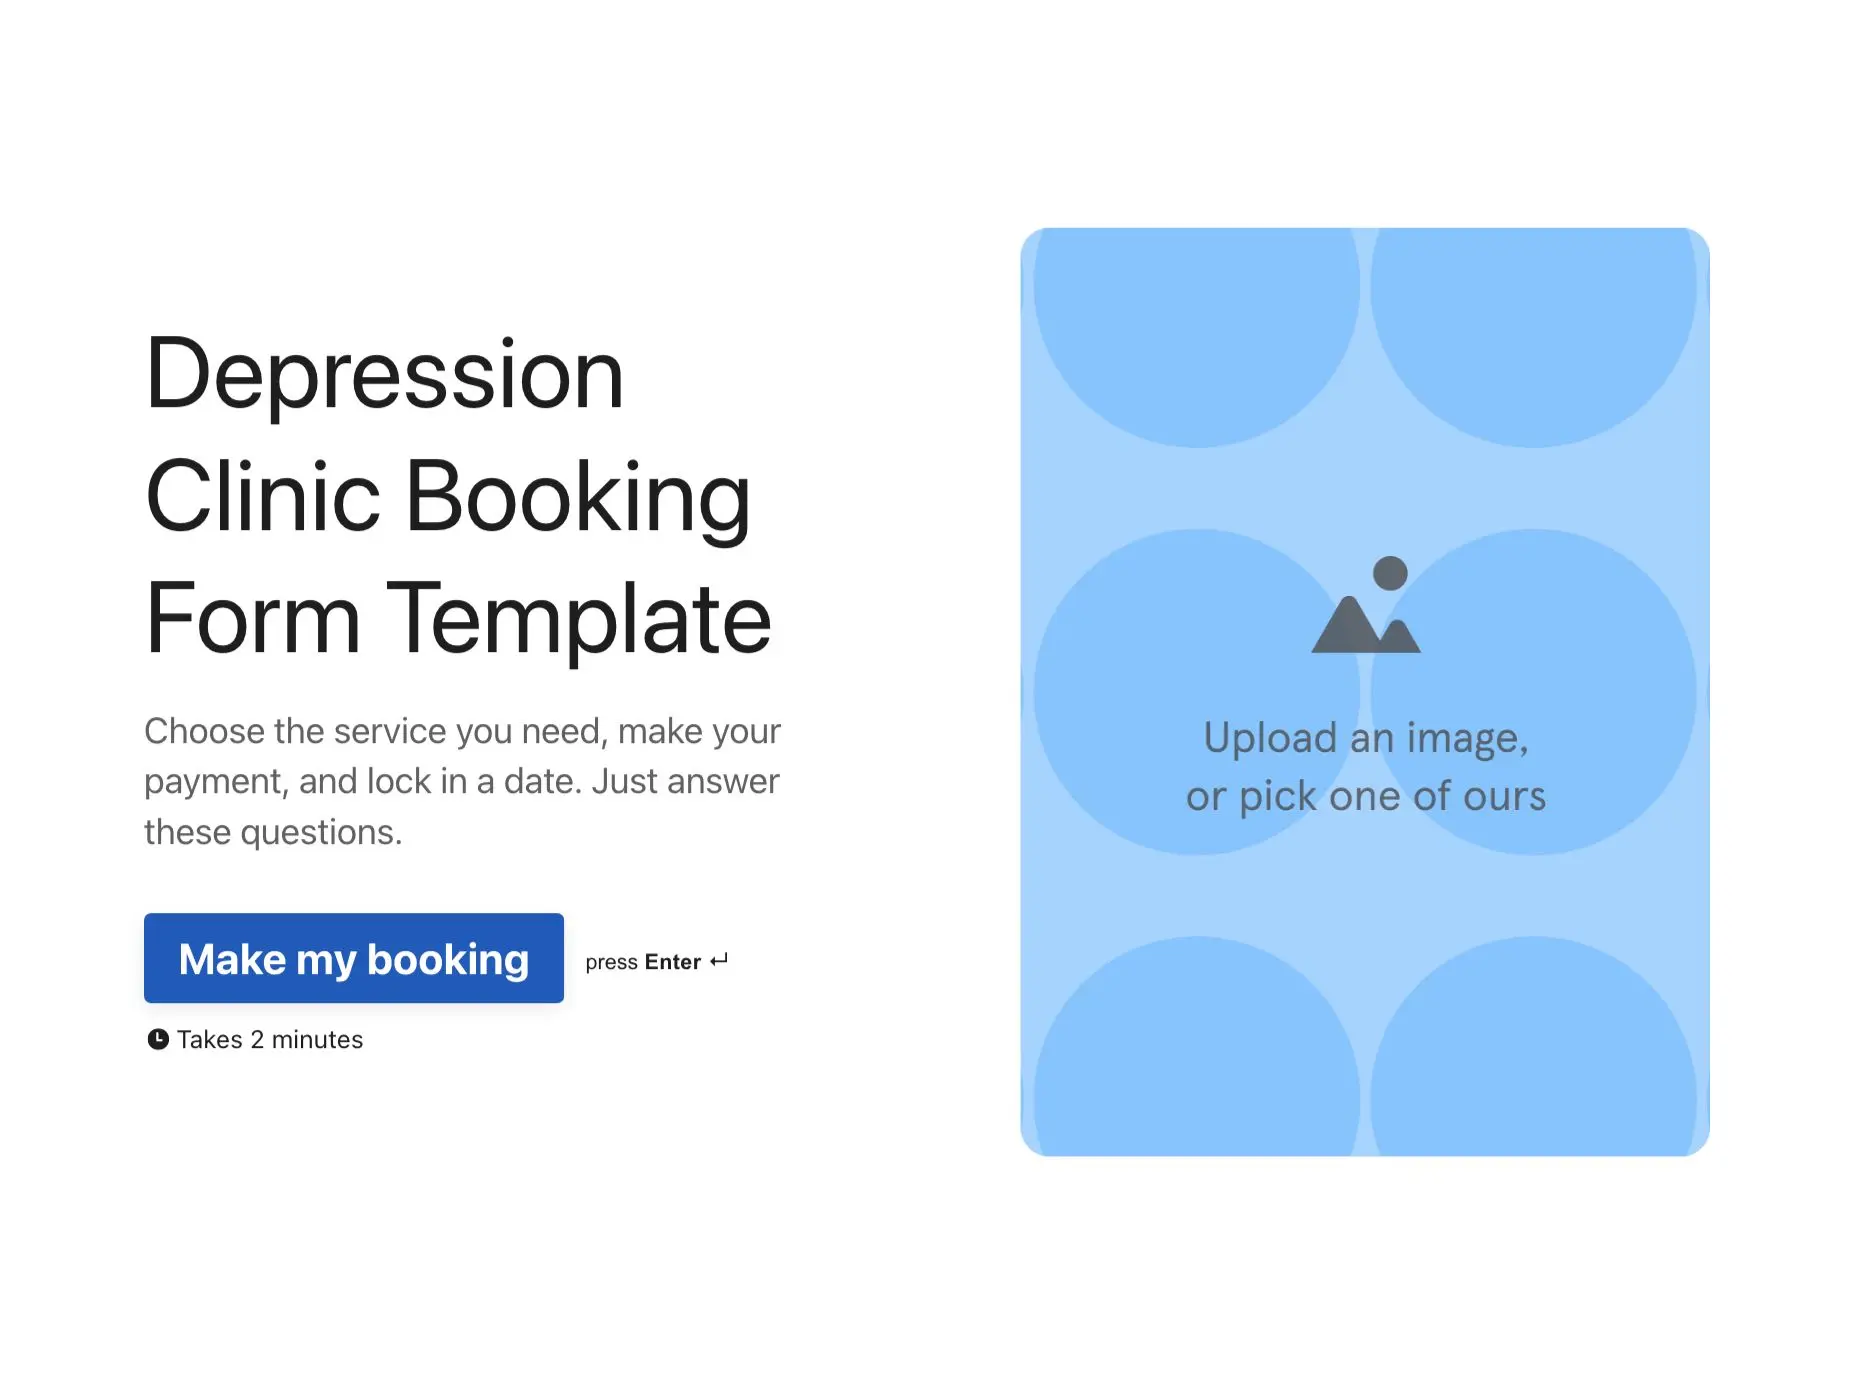 Depression Clinic Booking Form Template Hero